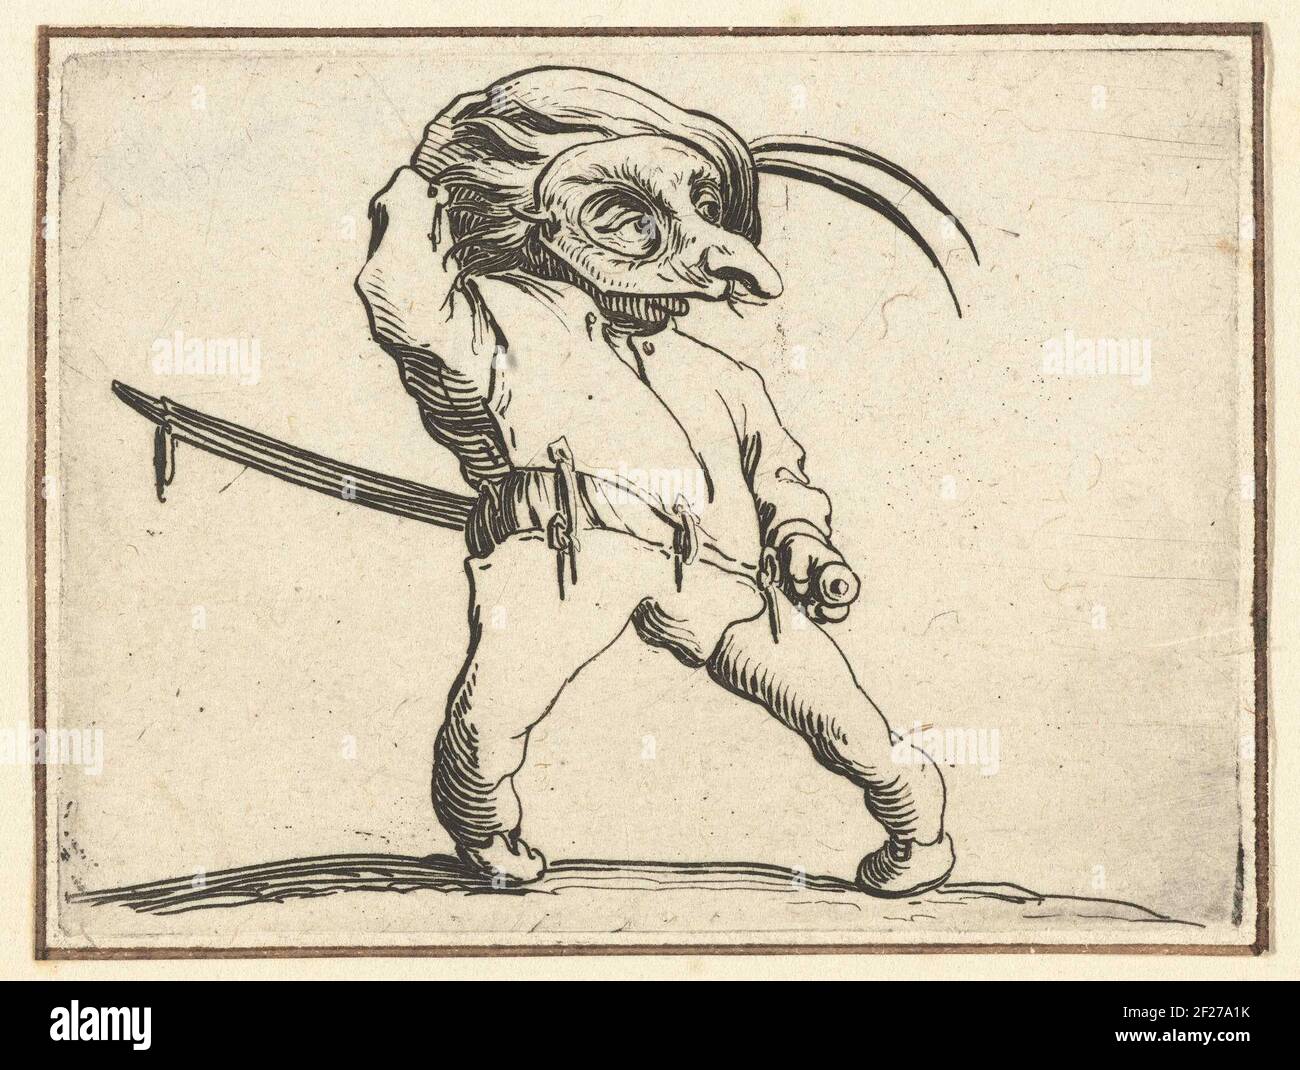 dwarf with sword and mask varie figure gobbi di jacopo callot various grotesque figures dwarves and iced dwarf seen from the front a hat with two springs on the head a mask for the face the left hand on the hilt of his sword this print is part of a series of 21 prints with grotesque figures virtually all those figures are dwarfs many have been hatched 2F27A1K